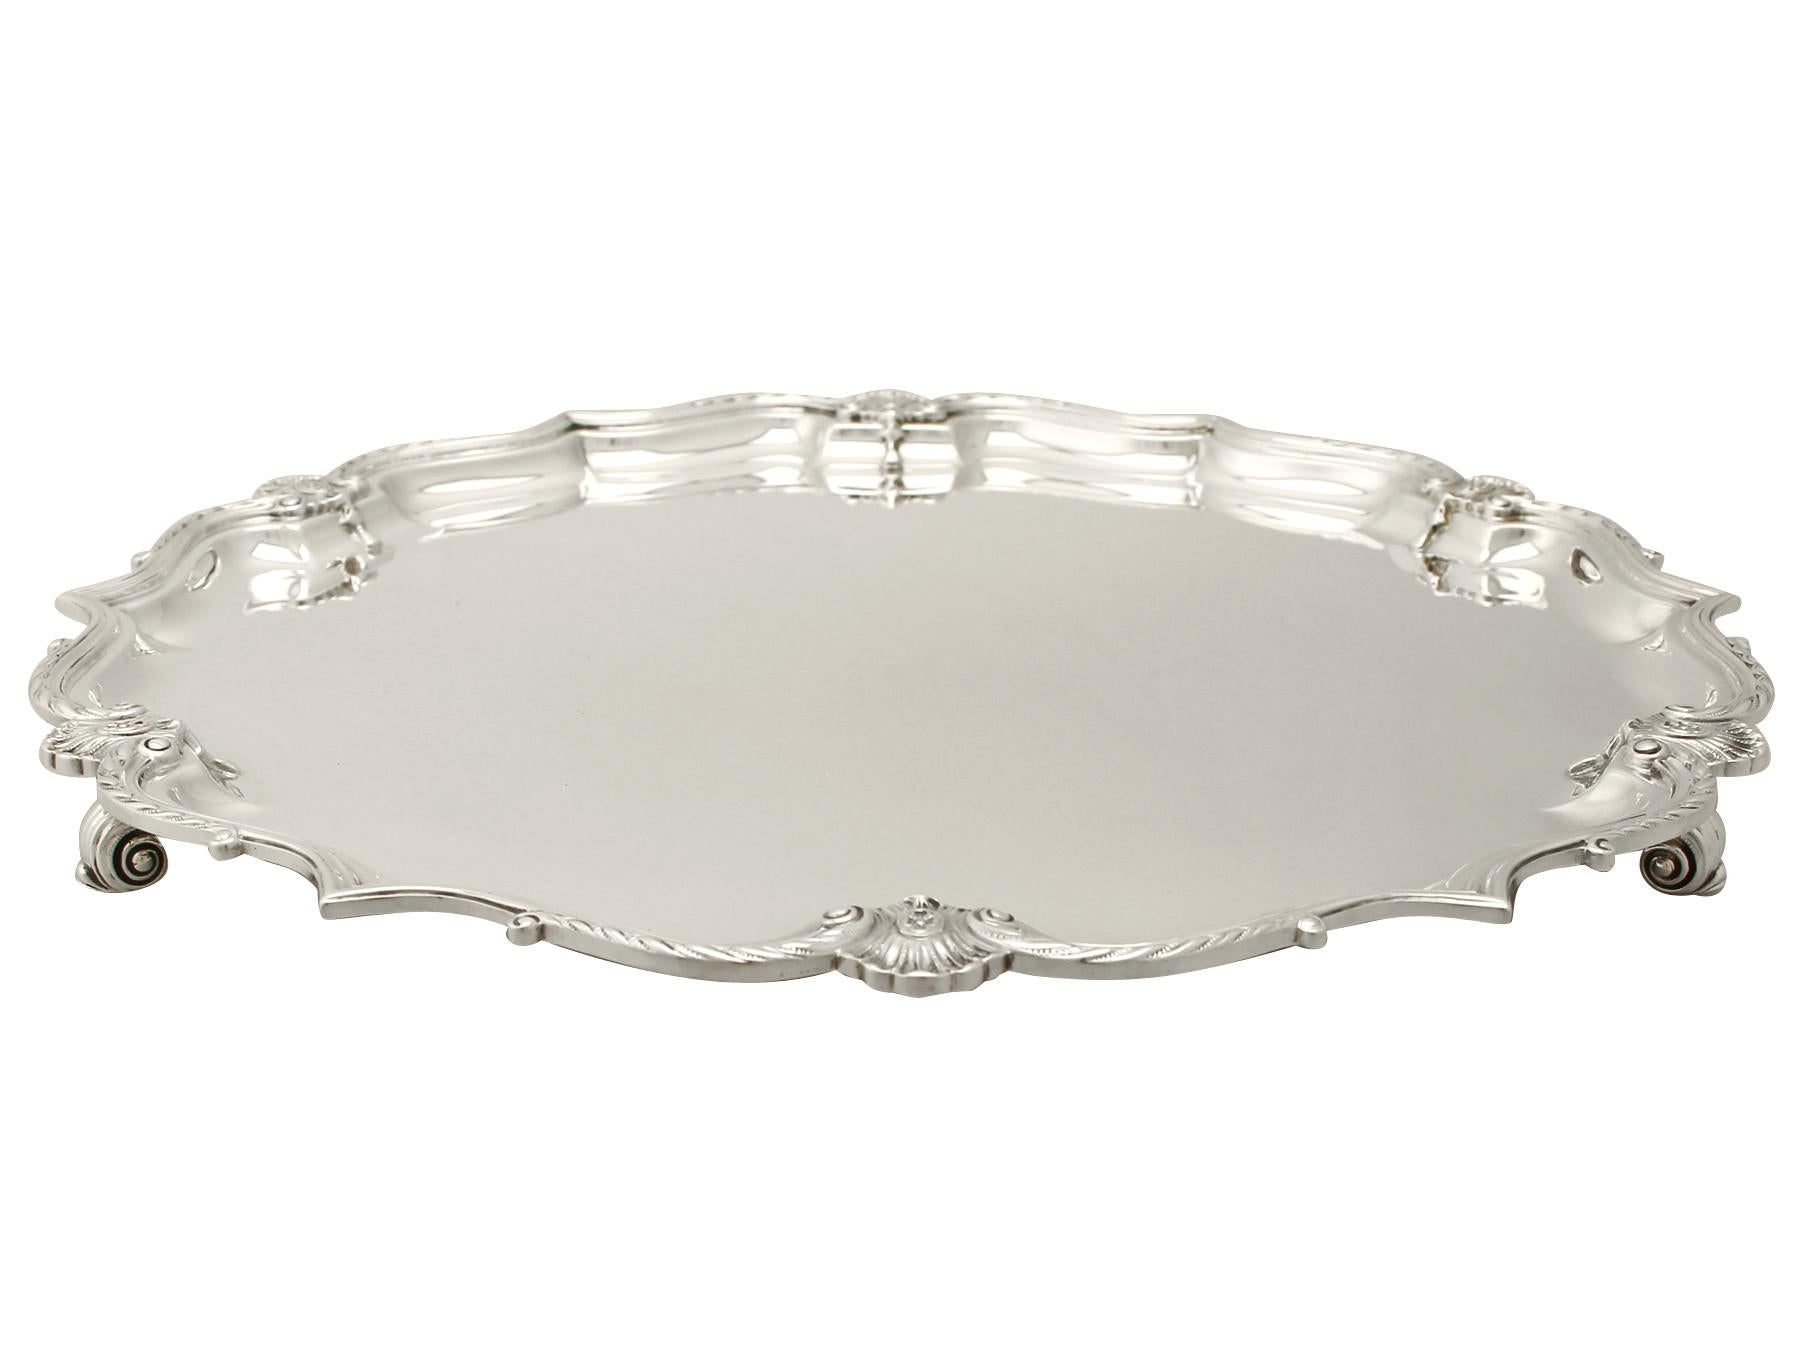 An exceptional, fine and impressive antique George VI English sterling silver salver, an addition to our silver dining collection.

This exceptional antique George VI English sterling silver salver has a circular shaped form onto three